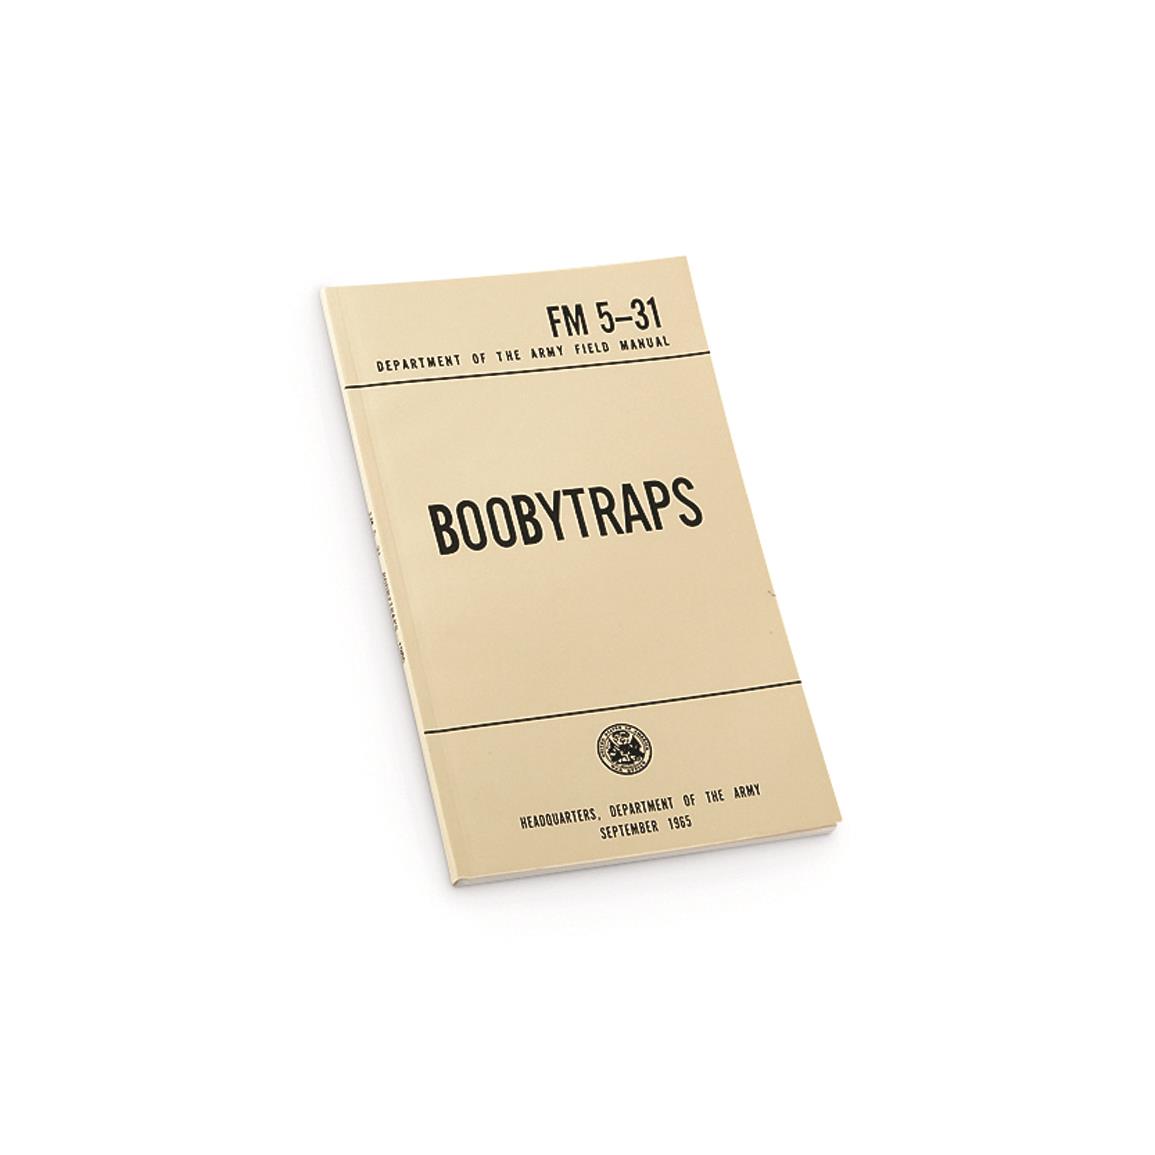 New U.S. Military Surplus Technical Manual on Booby Traps